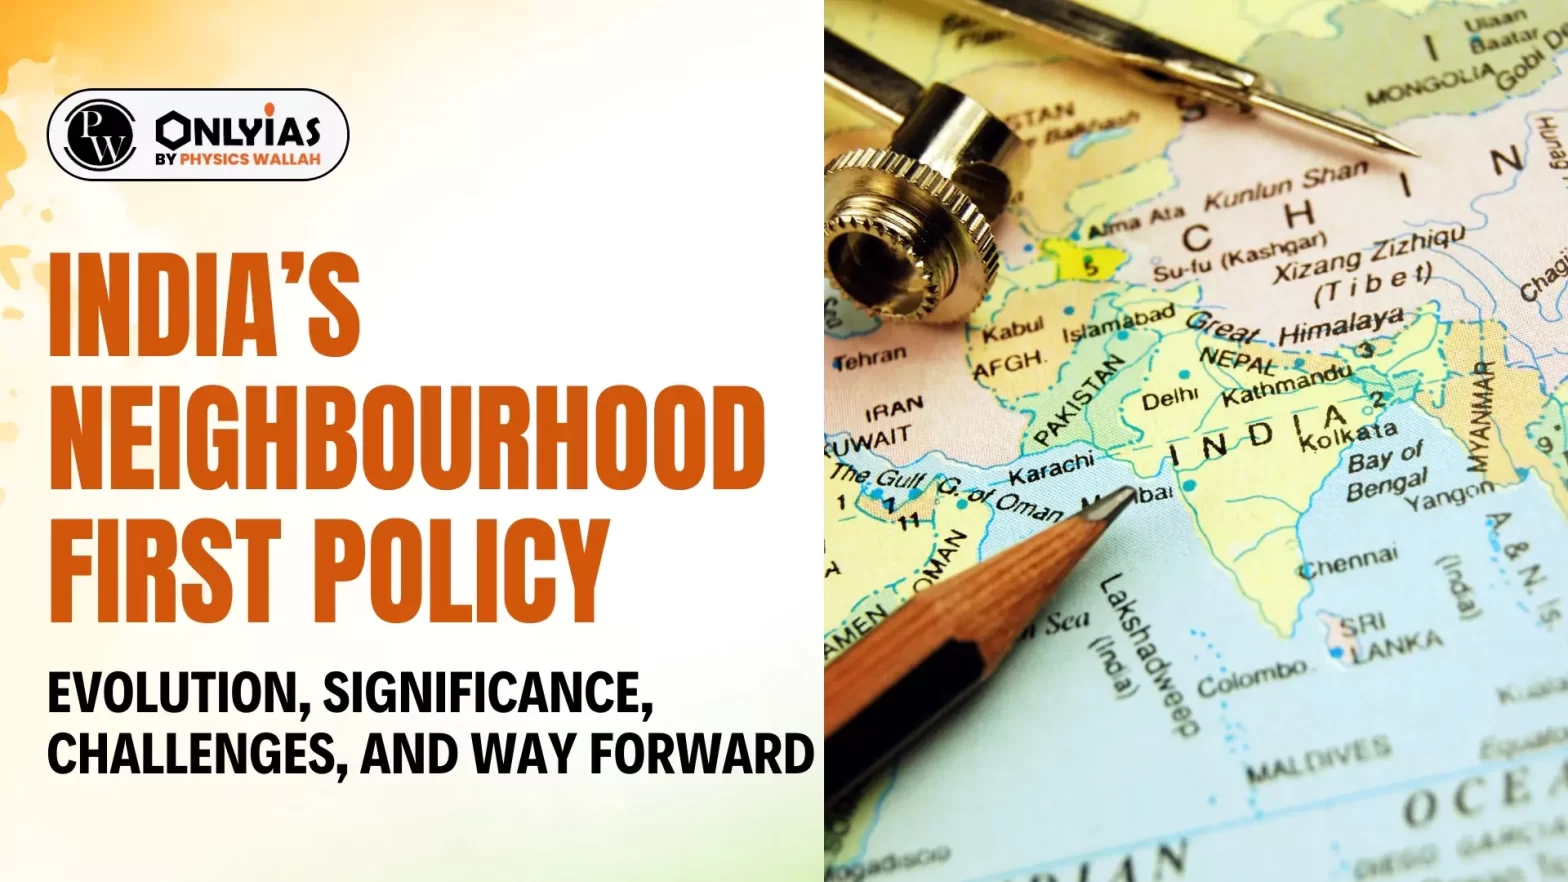 India’s Neighbourhood First Policy: Evolution, Significance, Challenges, and Way Forward